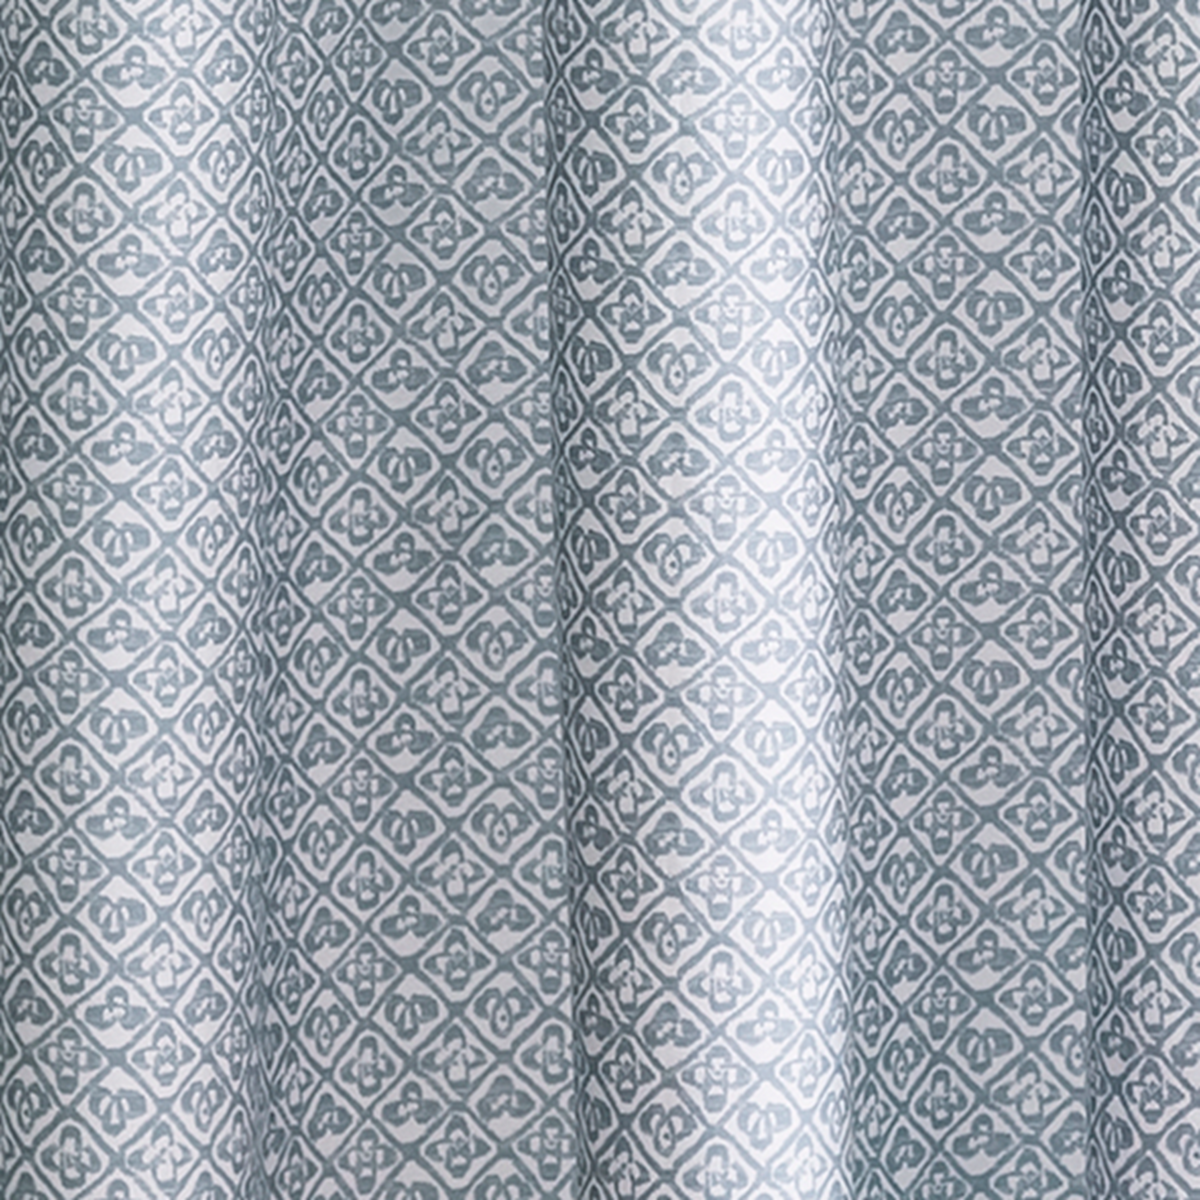 Swatch Sample of Matouk Catarina Shower Curtain in Color Hazy Blue